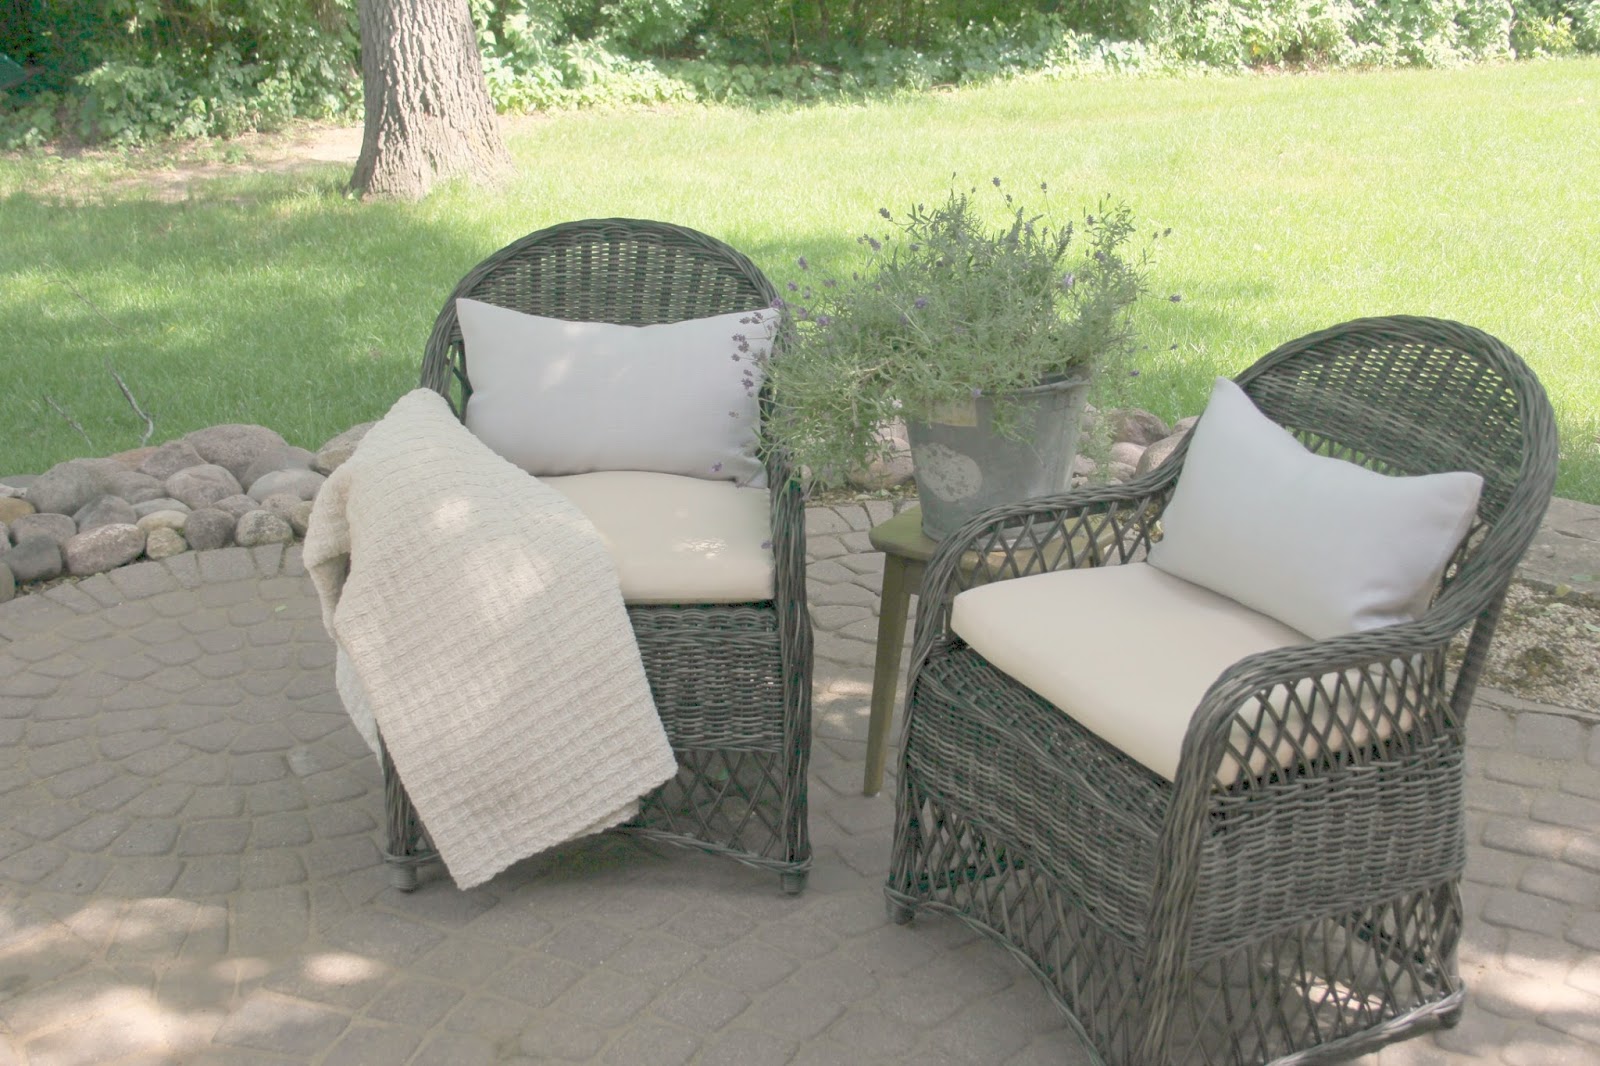 Safavieh rattan grey chairs on my patio. Come tour my home and consider inexpensive approaches to simple decor. 